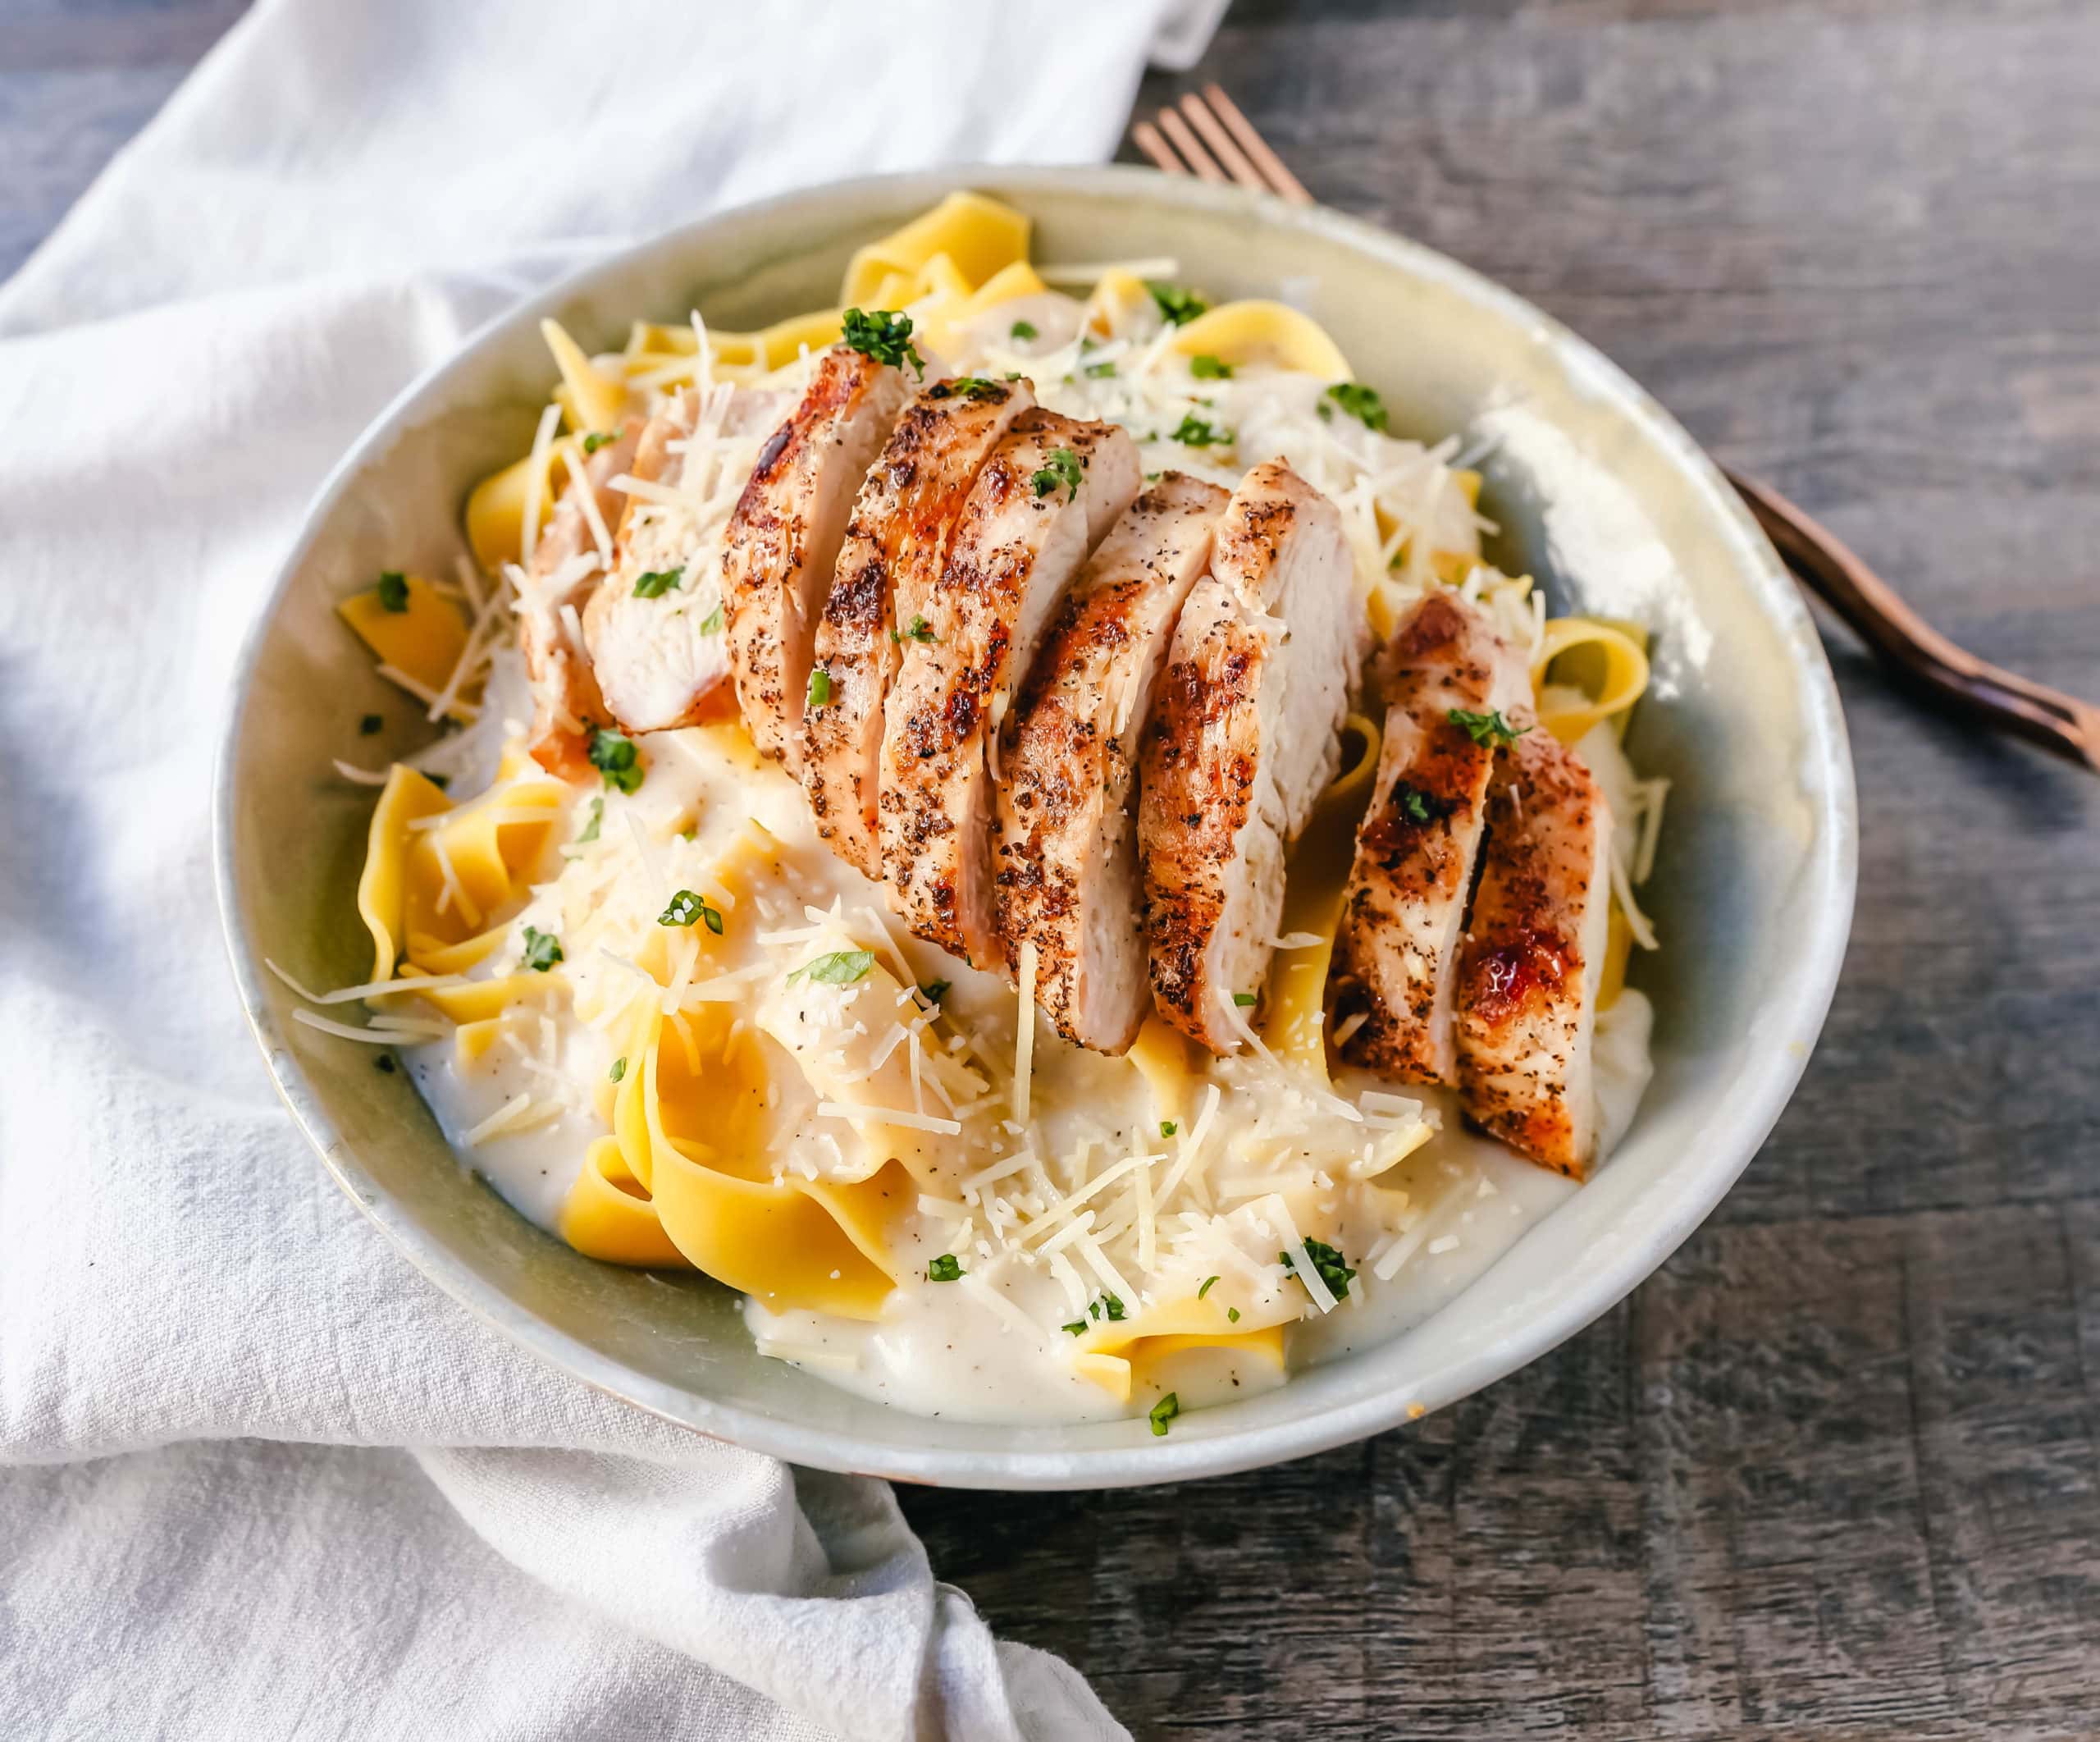 Skinny Low-Fat Chicken Fettuccine Alfredo All of the flavor of Chicken Fettuccine Alfredo without all of the fat and calories! Lean grilled chicken on top of low-fat alfredo sauce tossed with fettuccine noodles. www.modernhoney.com #lowfat #chicken #pasta 